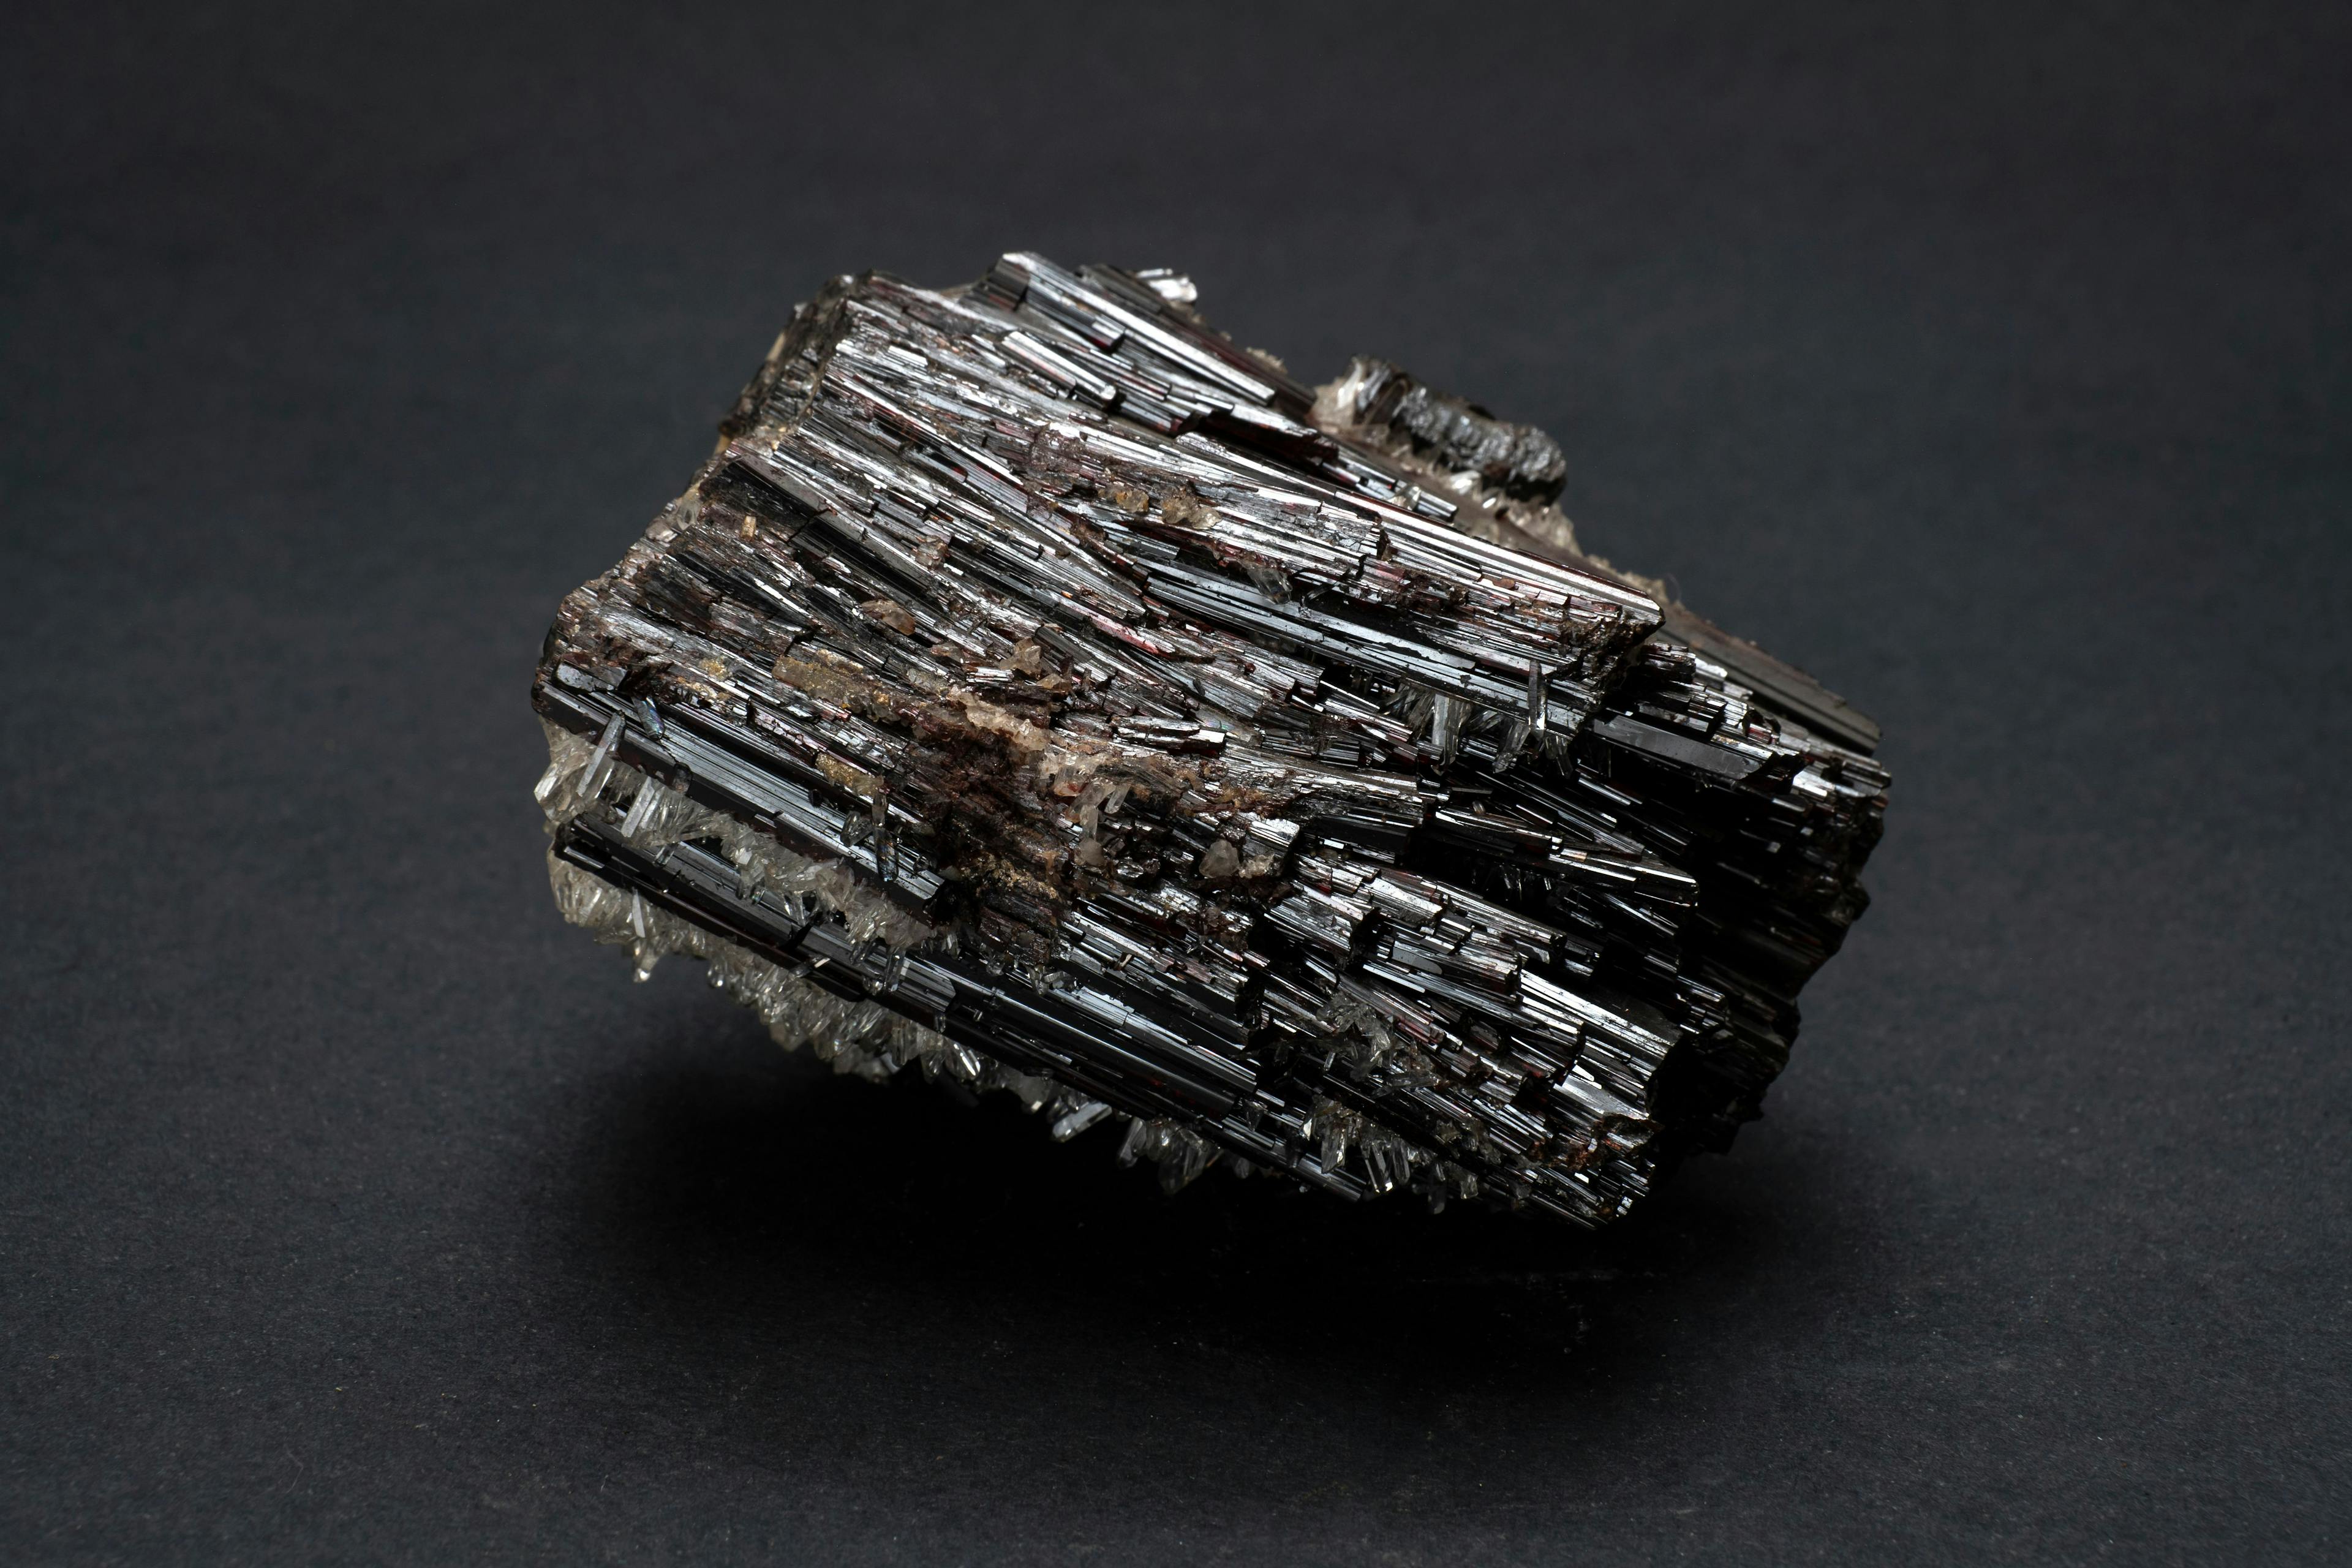 Piece of Hubnerite mineral from Pasto Bueno, Peru. A mineral consisting of manganese tungsten oxide with black monoclinic prismatic submetallic crystals with fine striations | Image Credit: © MyriamB - stock.adobe.com